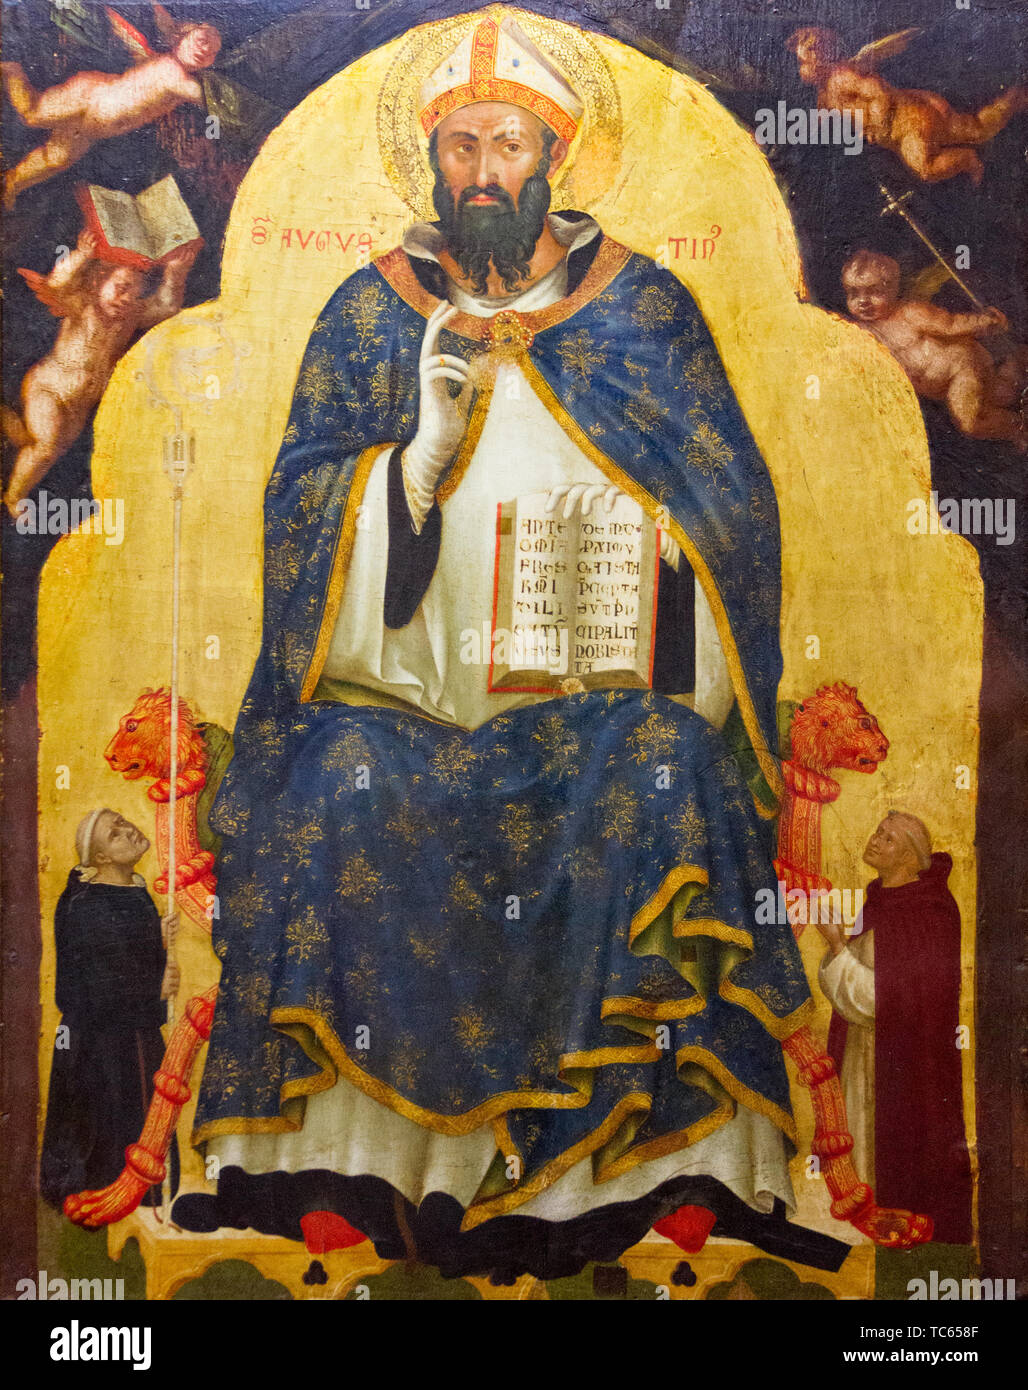 The painting of Saint Augustine. Painted in XIV century (1330s-1340s) by Jacobello di Bonomo. Currently in Castello Visconteo. Stock Photo